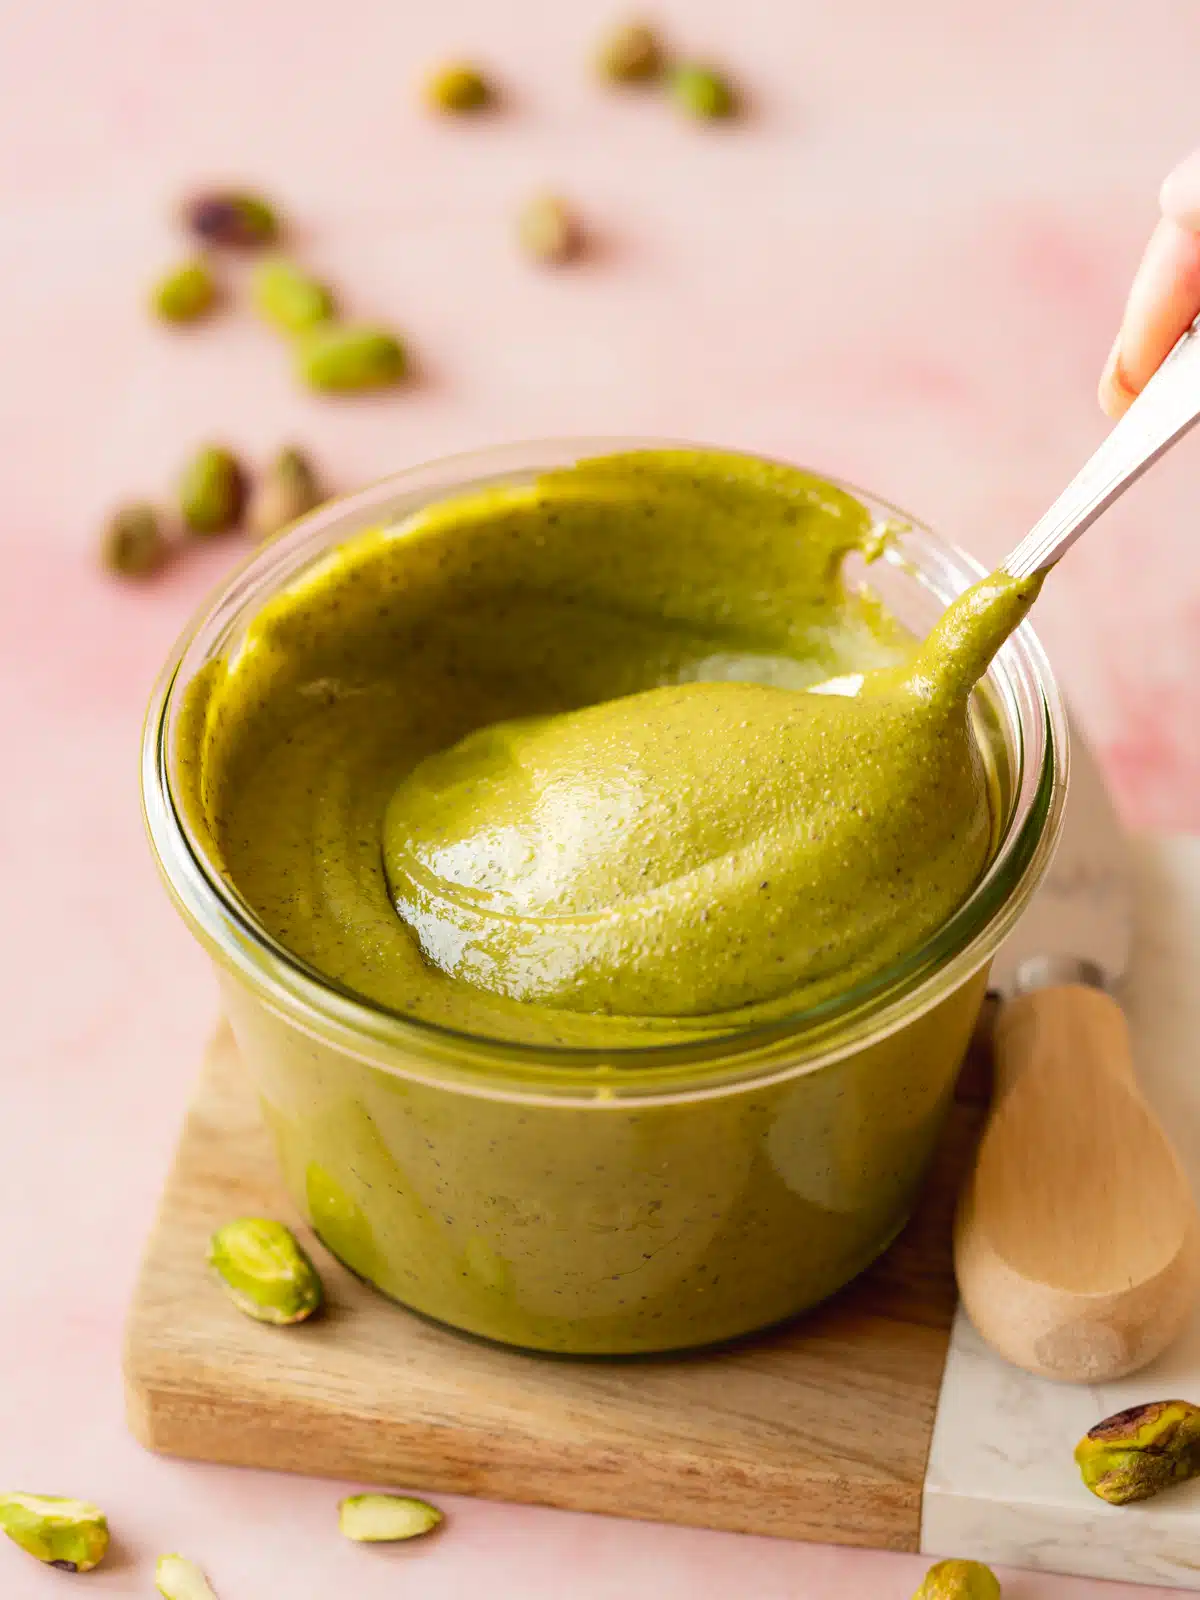 a spoon stirring a glass jar of pistachio butter showing the thick texture.